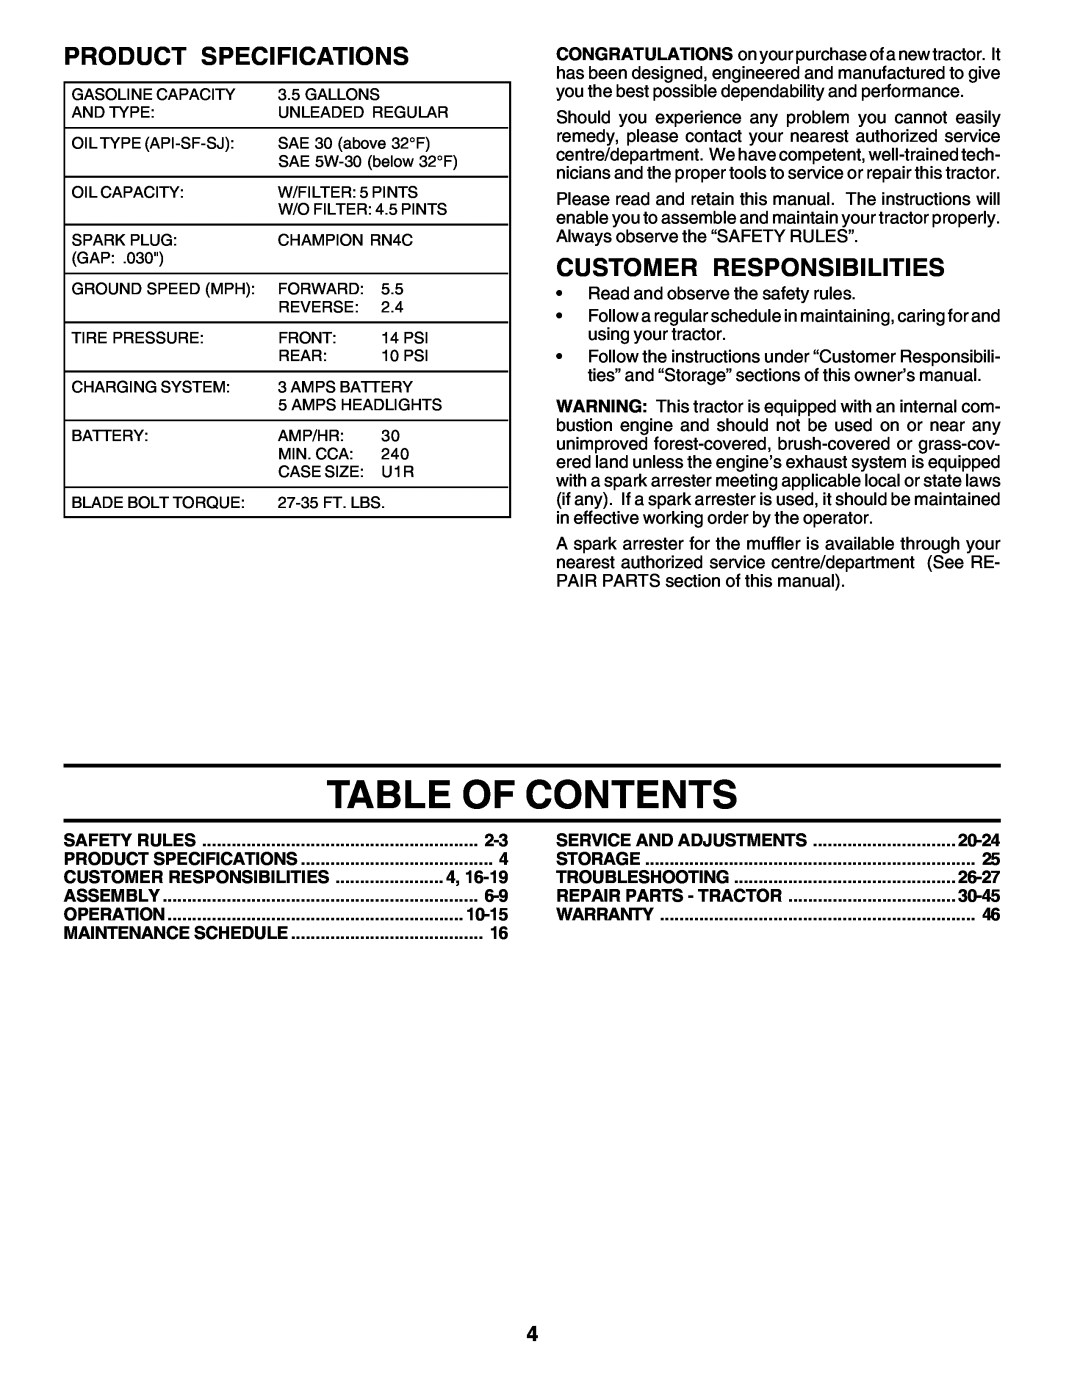 Weed Eater 178387 owner manual Table Of Contents, Product Specifications, Customer Responsibilities 